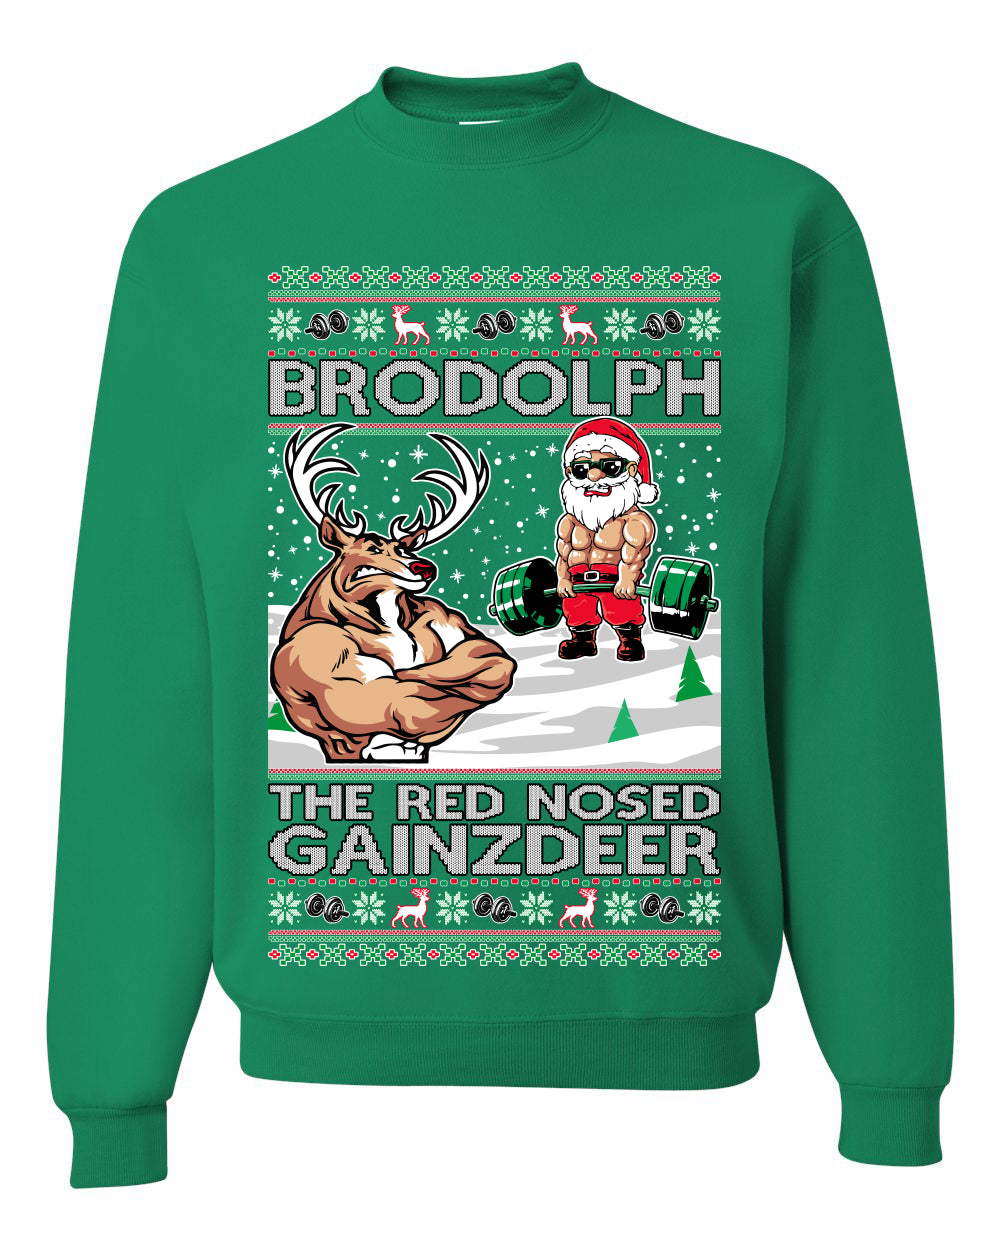 Brodolph Santa Working Out Gym the Red Nosed Gainzdeer Ugly Christmas Sweater Unisex Crewneck Graphic Sweatshirt